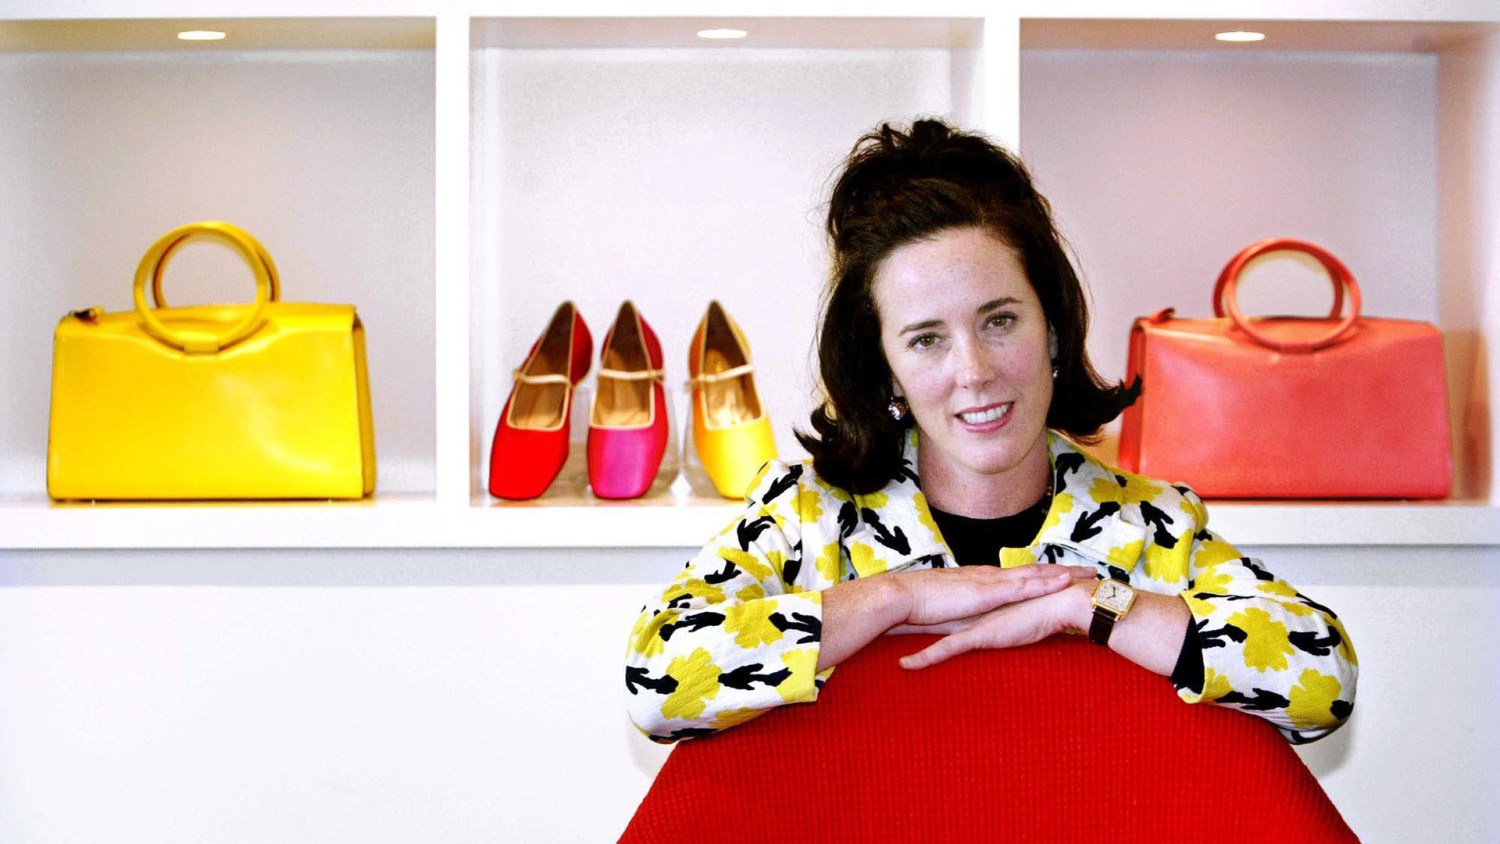 Fashion designer Kate Spade dies of an apparent suicide at 55